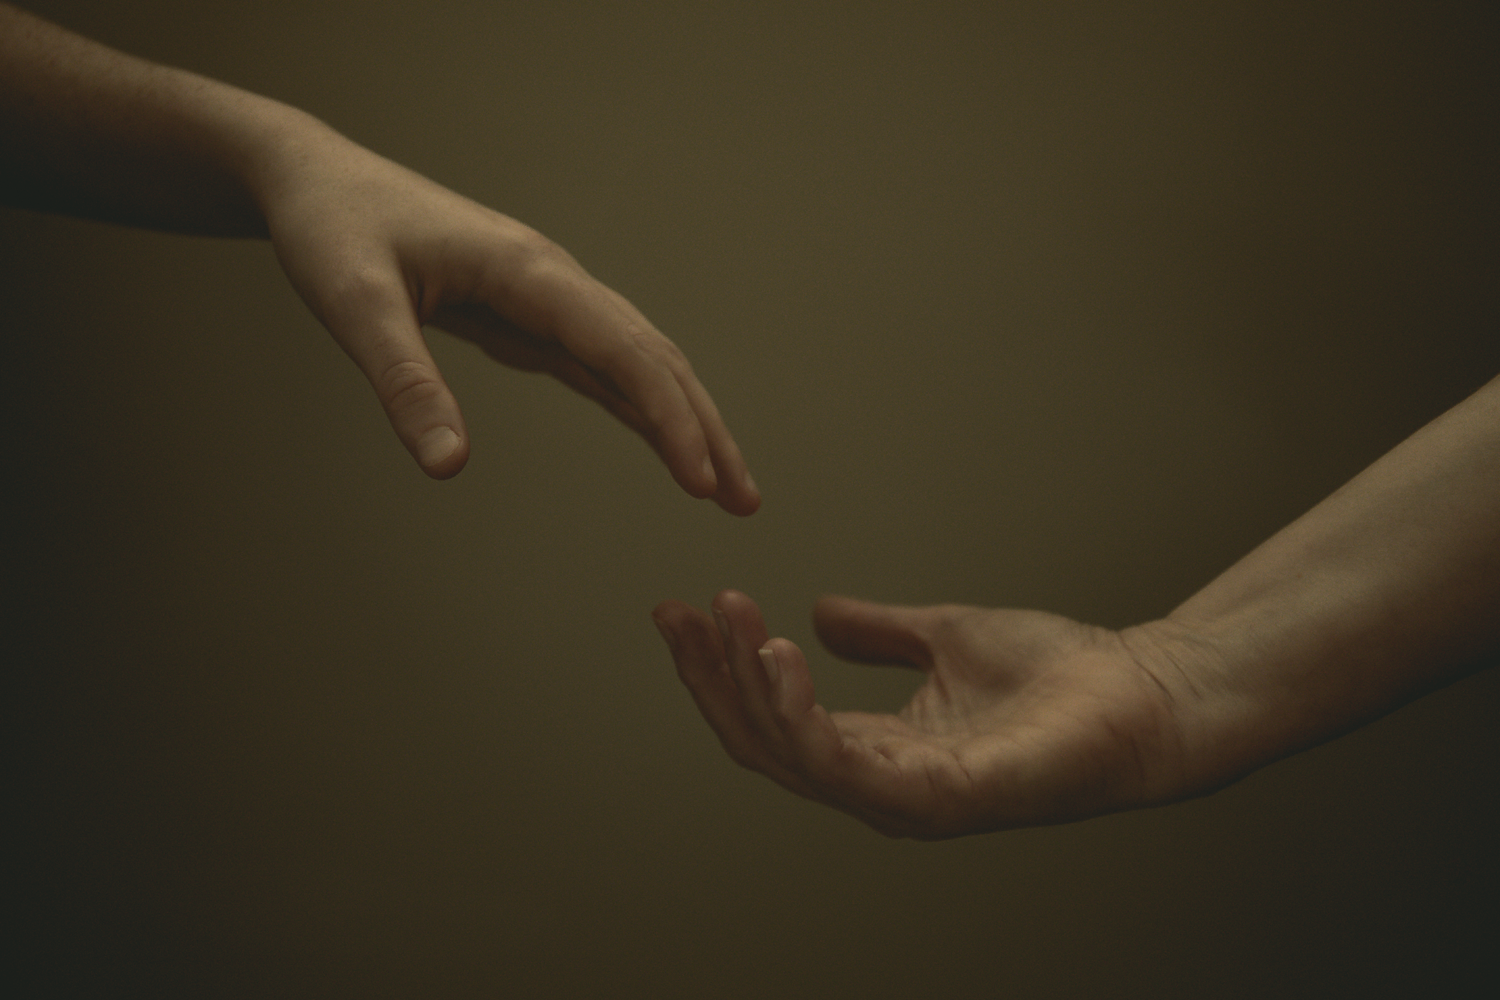 Colour photograph depicting two hands reaching to hold each other.